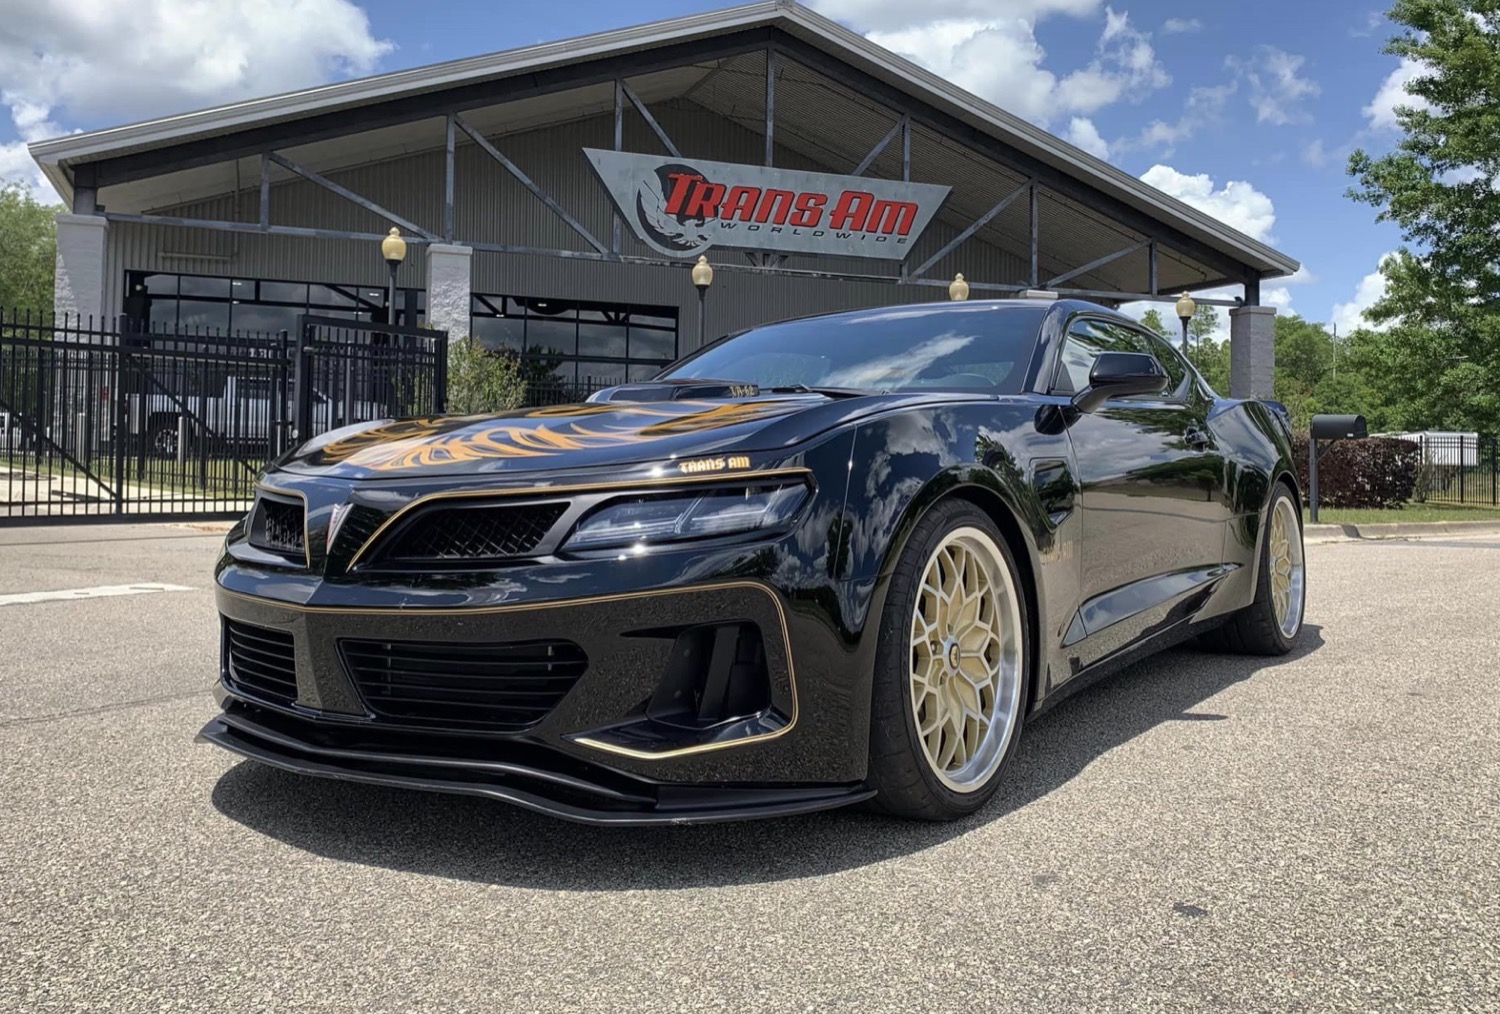 Rare 2020 Pontiac Trans Am Outlaw Is Up For Sale In Florida